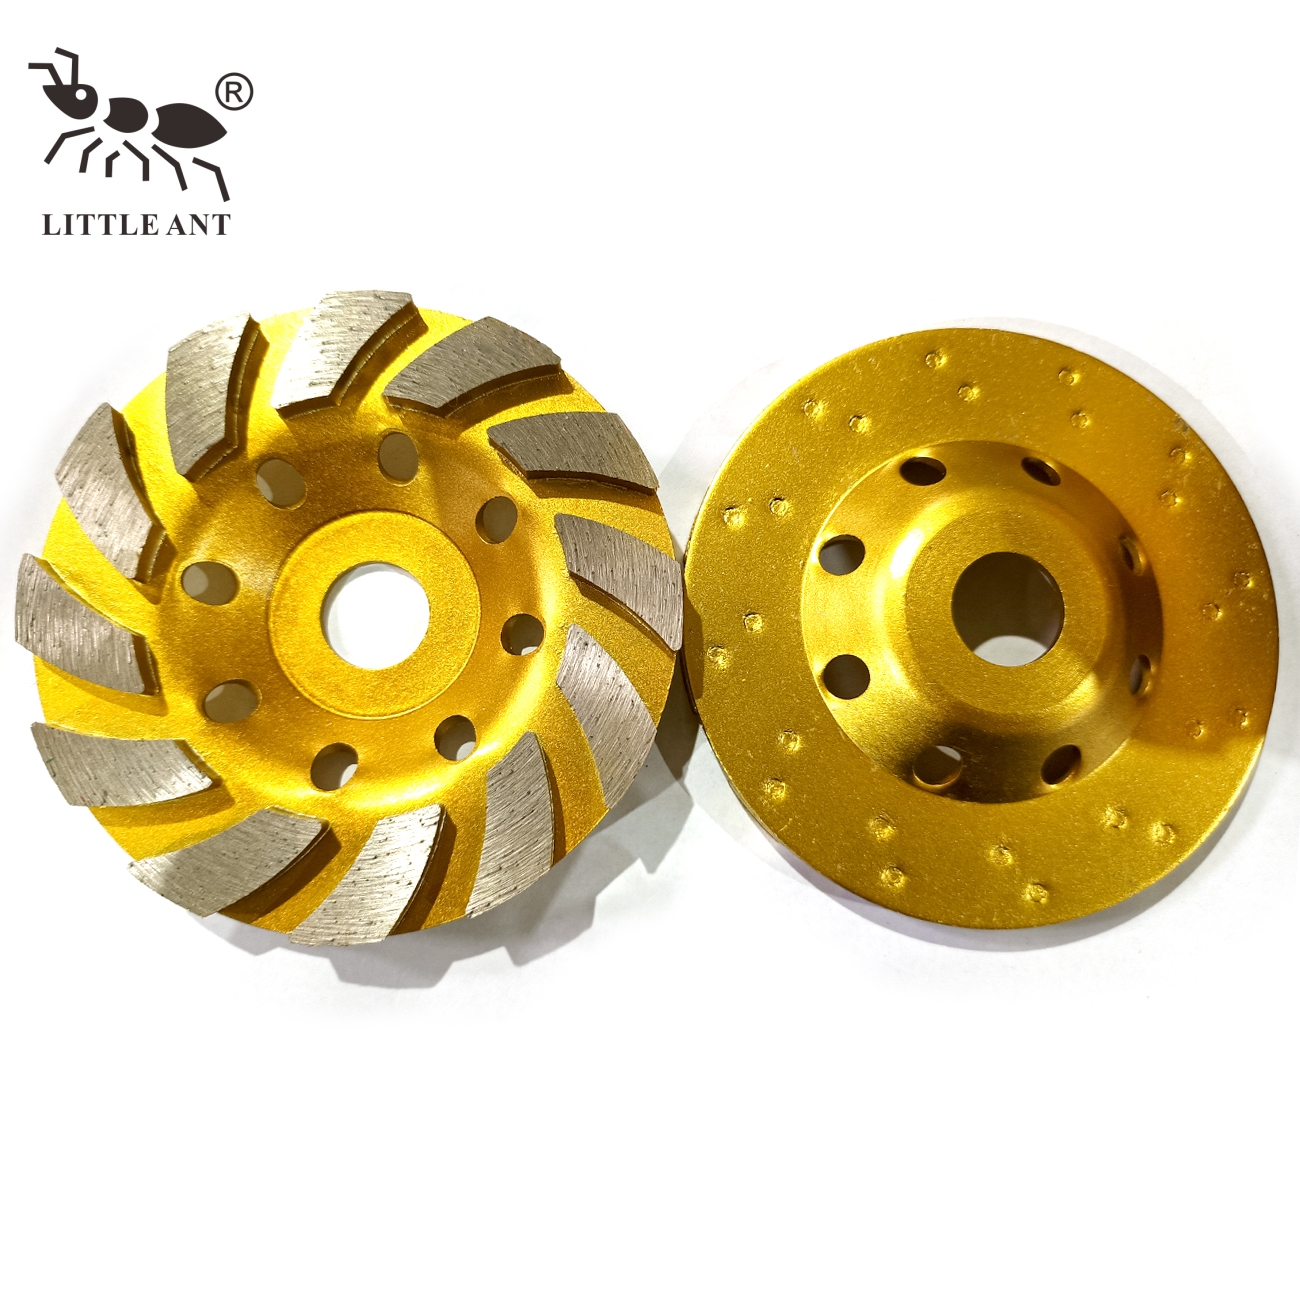 125mm Circular Cup Wheel for Grinder 5-inch Abrasive Tools for Concrete